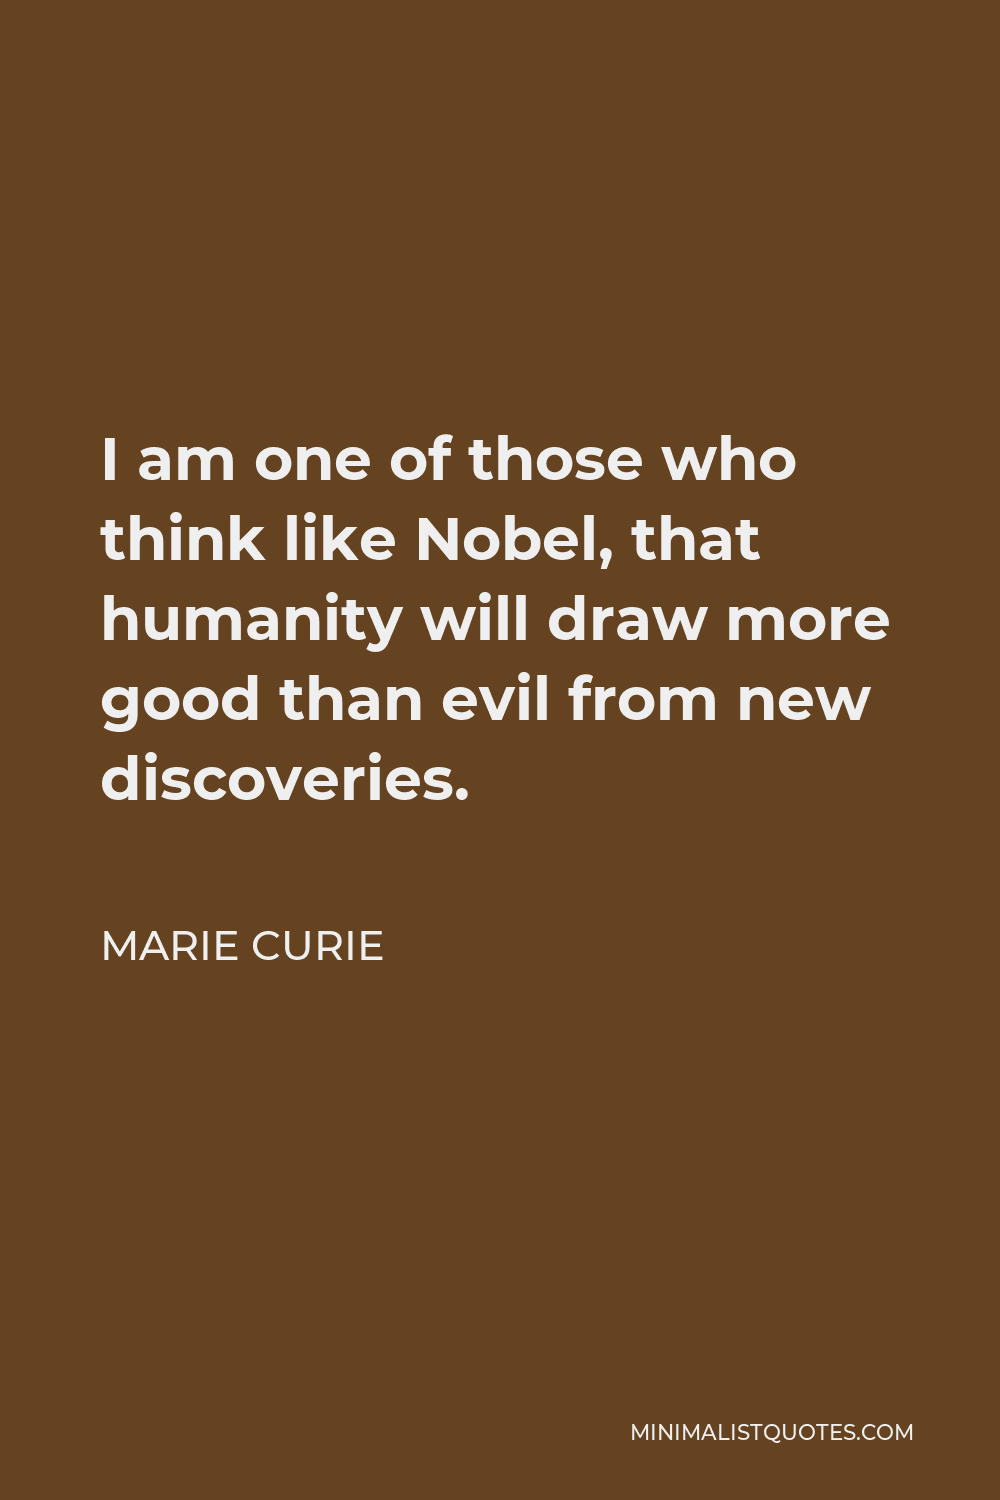 Marie Curie Quote - I am one of those who think like Nobel, that humanity will draw more good than evil from new discoveries.